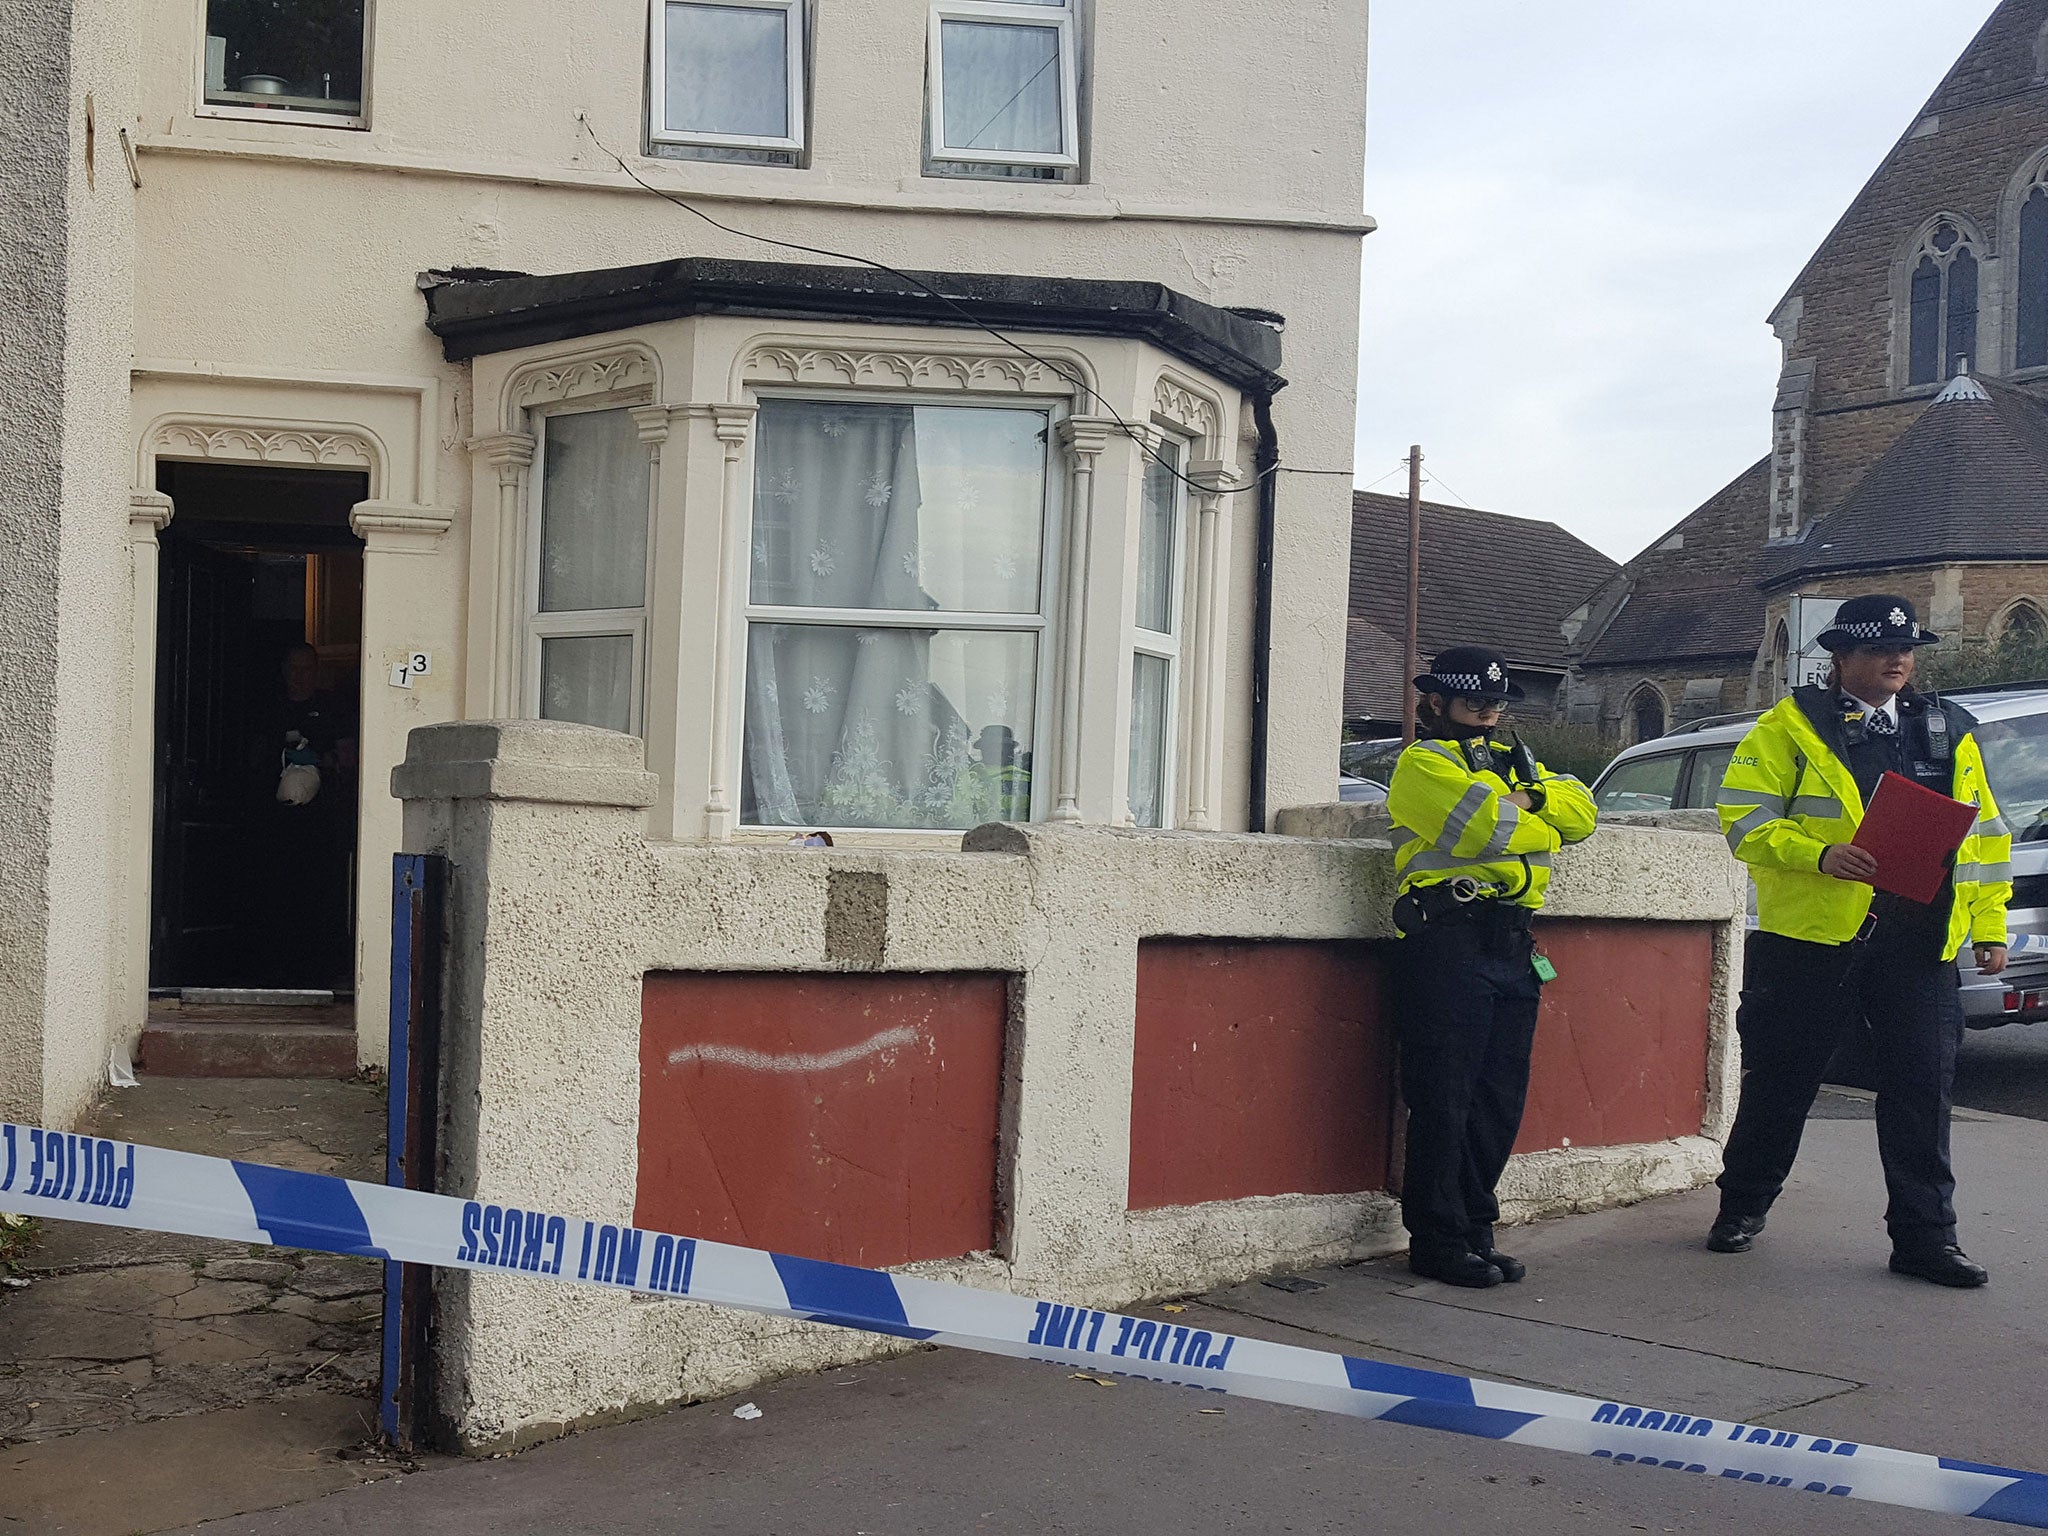 Police outside a property in Thornton Heath, south London, after a teenager was arrested by detectives investigating the Parsons Green terror attack. Two other males detained from separate addresses have now been released